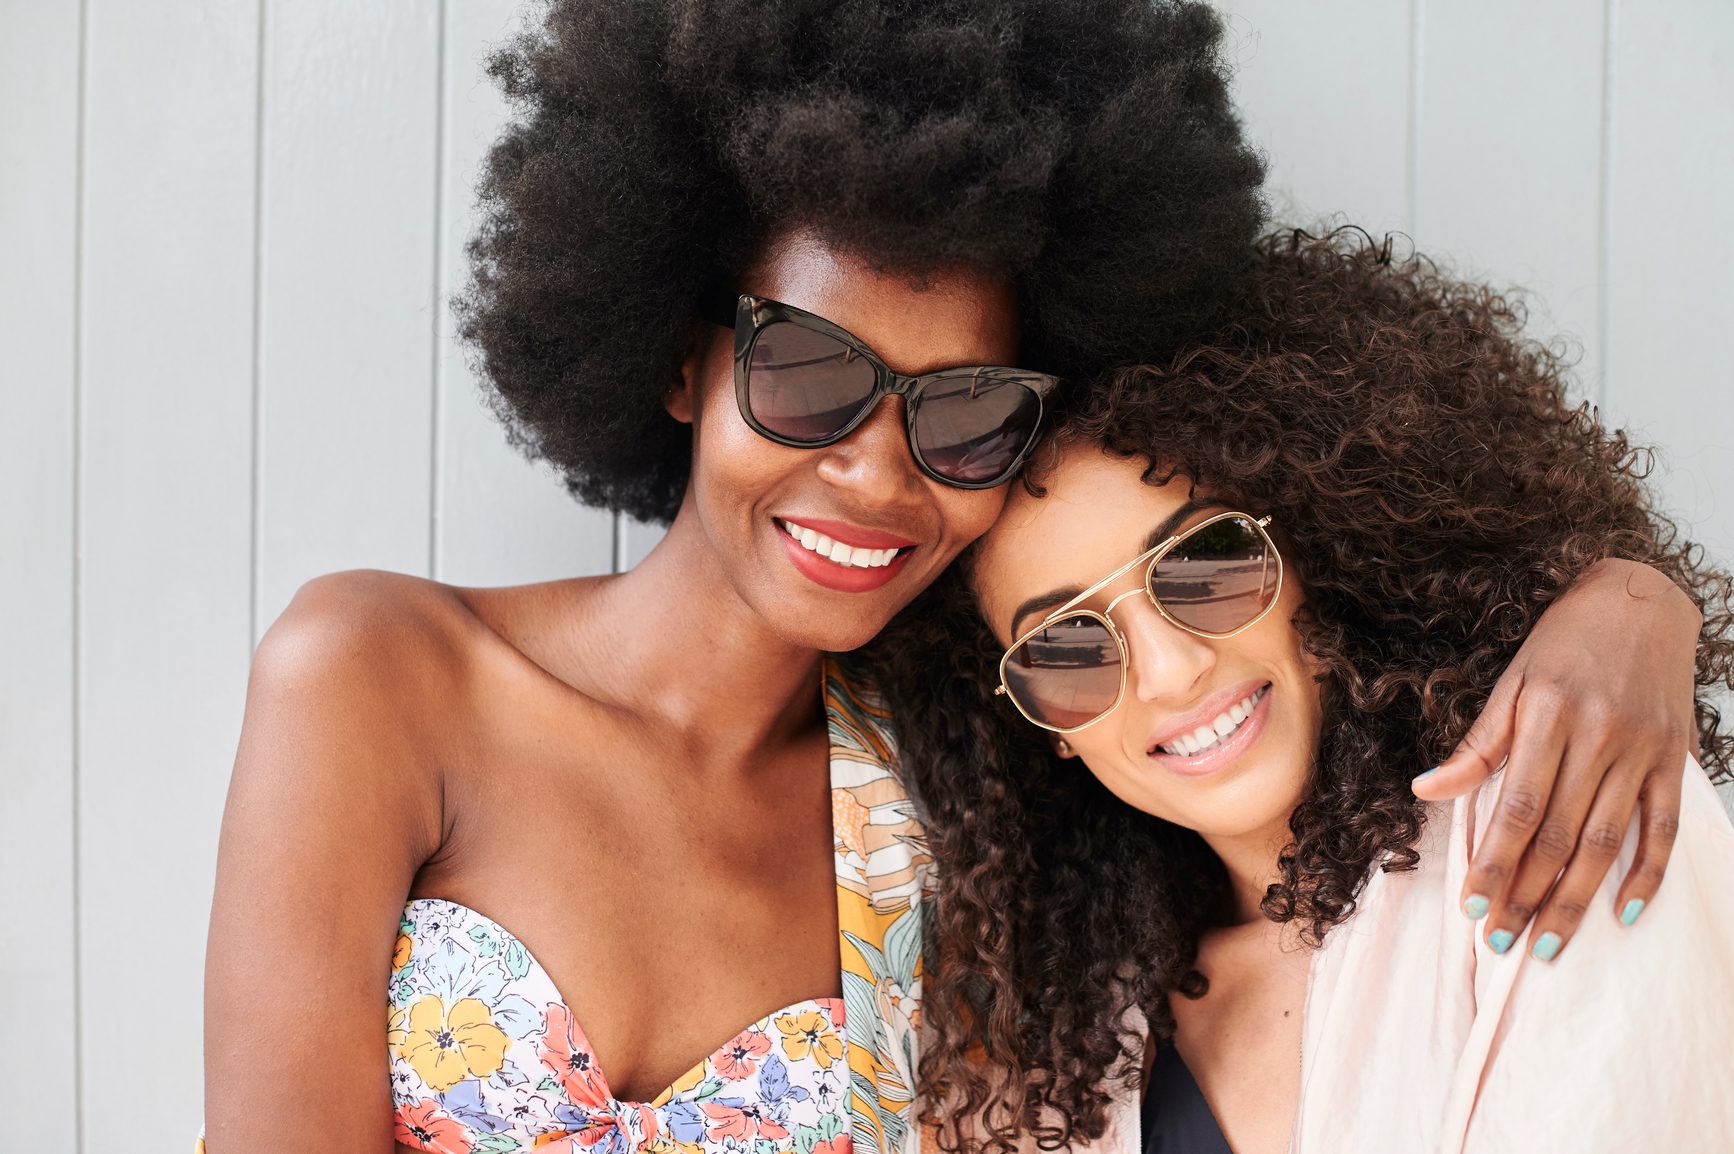 Multiethnic best friends portrait looking at camera wearing sunglasses in summer against grey background. Curly hair.